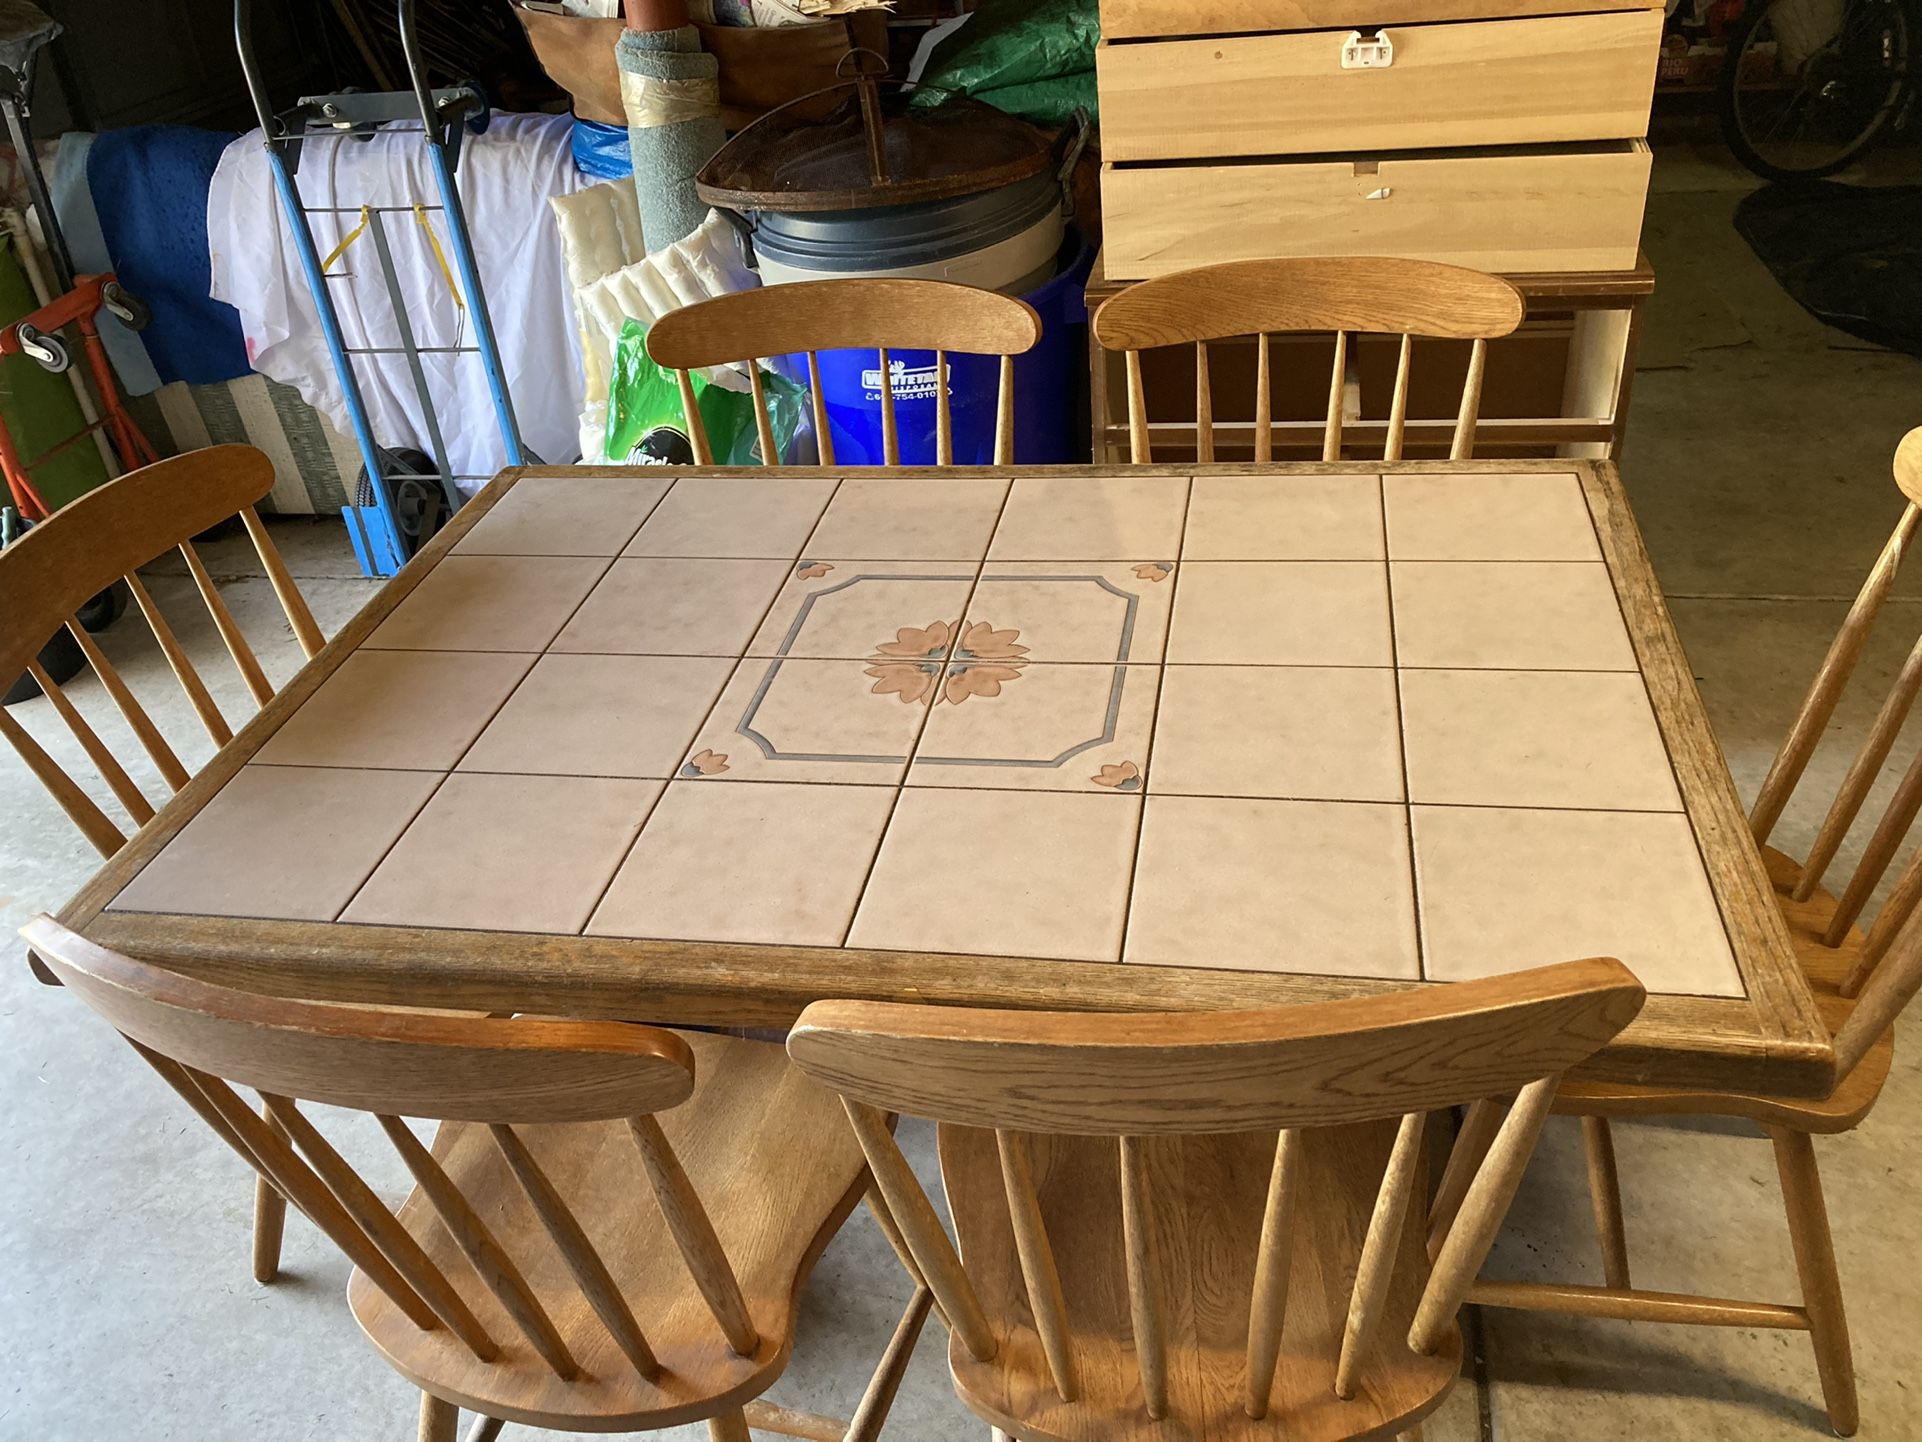 Kitchen Table With Mosaic Tiles And Six Chairs